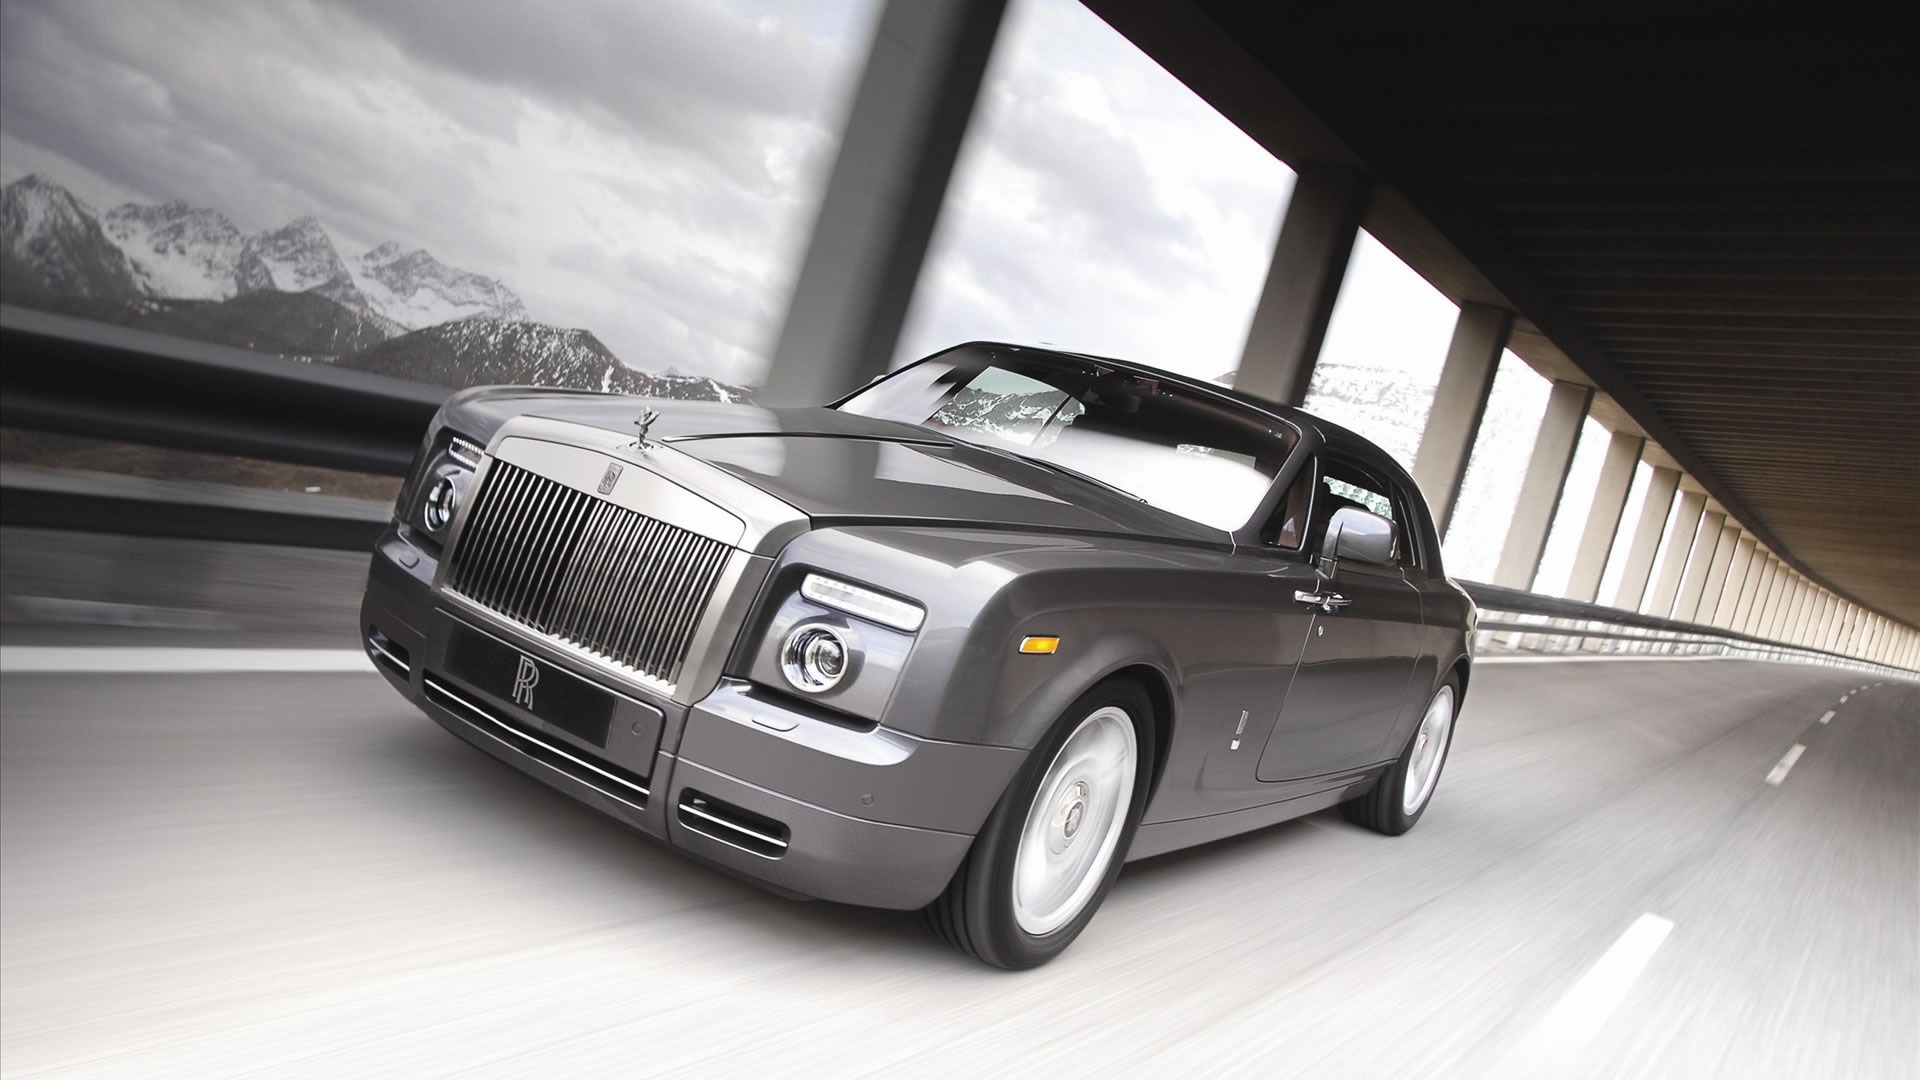 Superb Silver Rolls Royce for 1920 x 1080 HDTV 1080p resolution